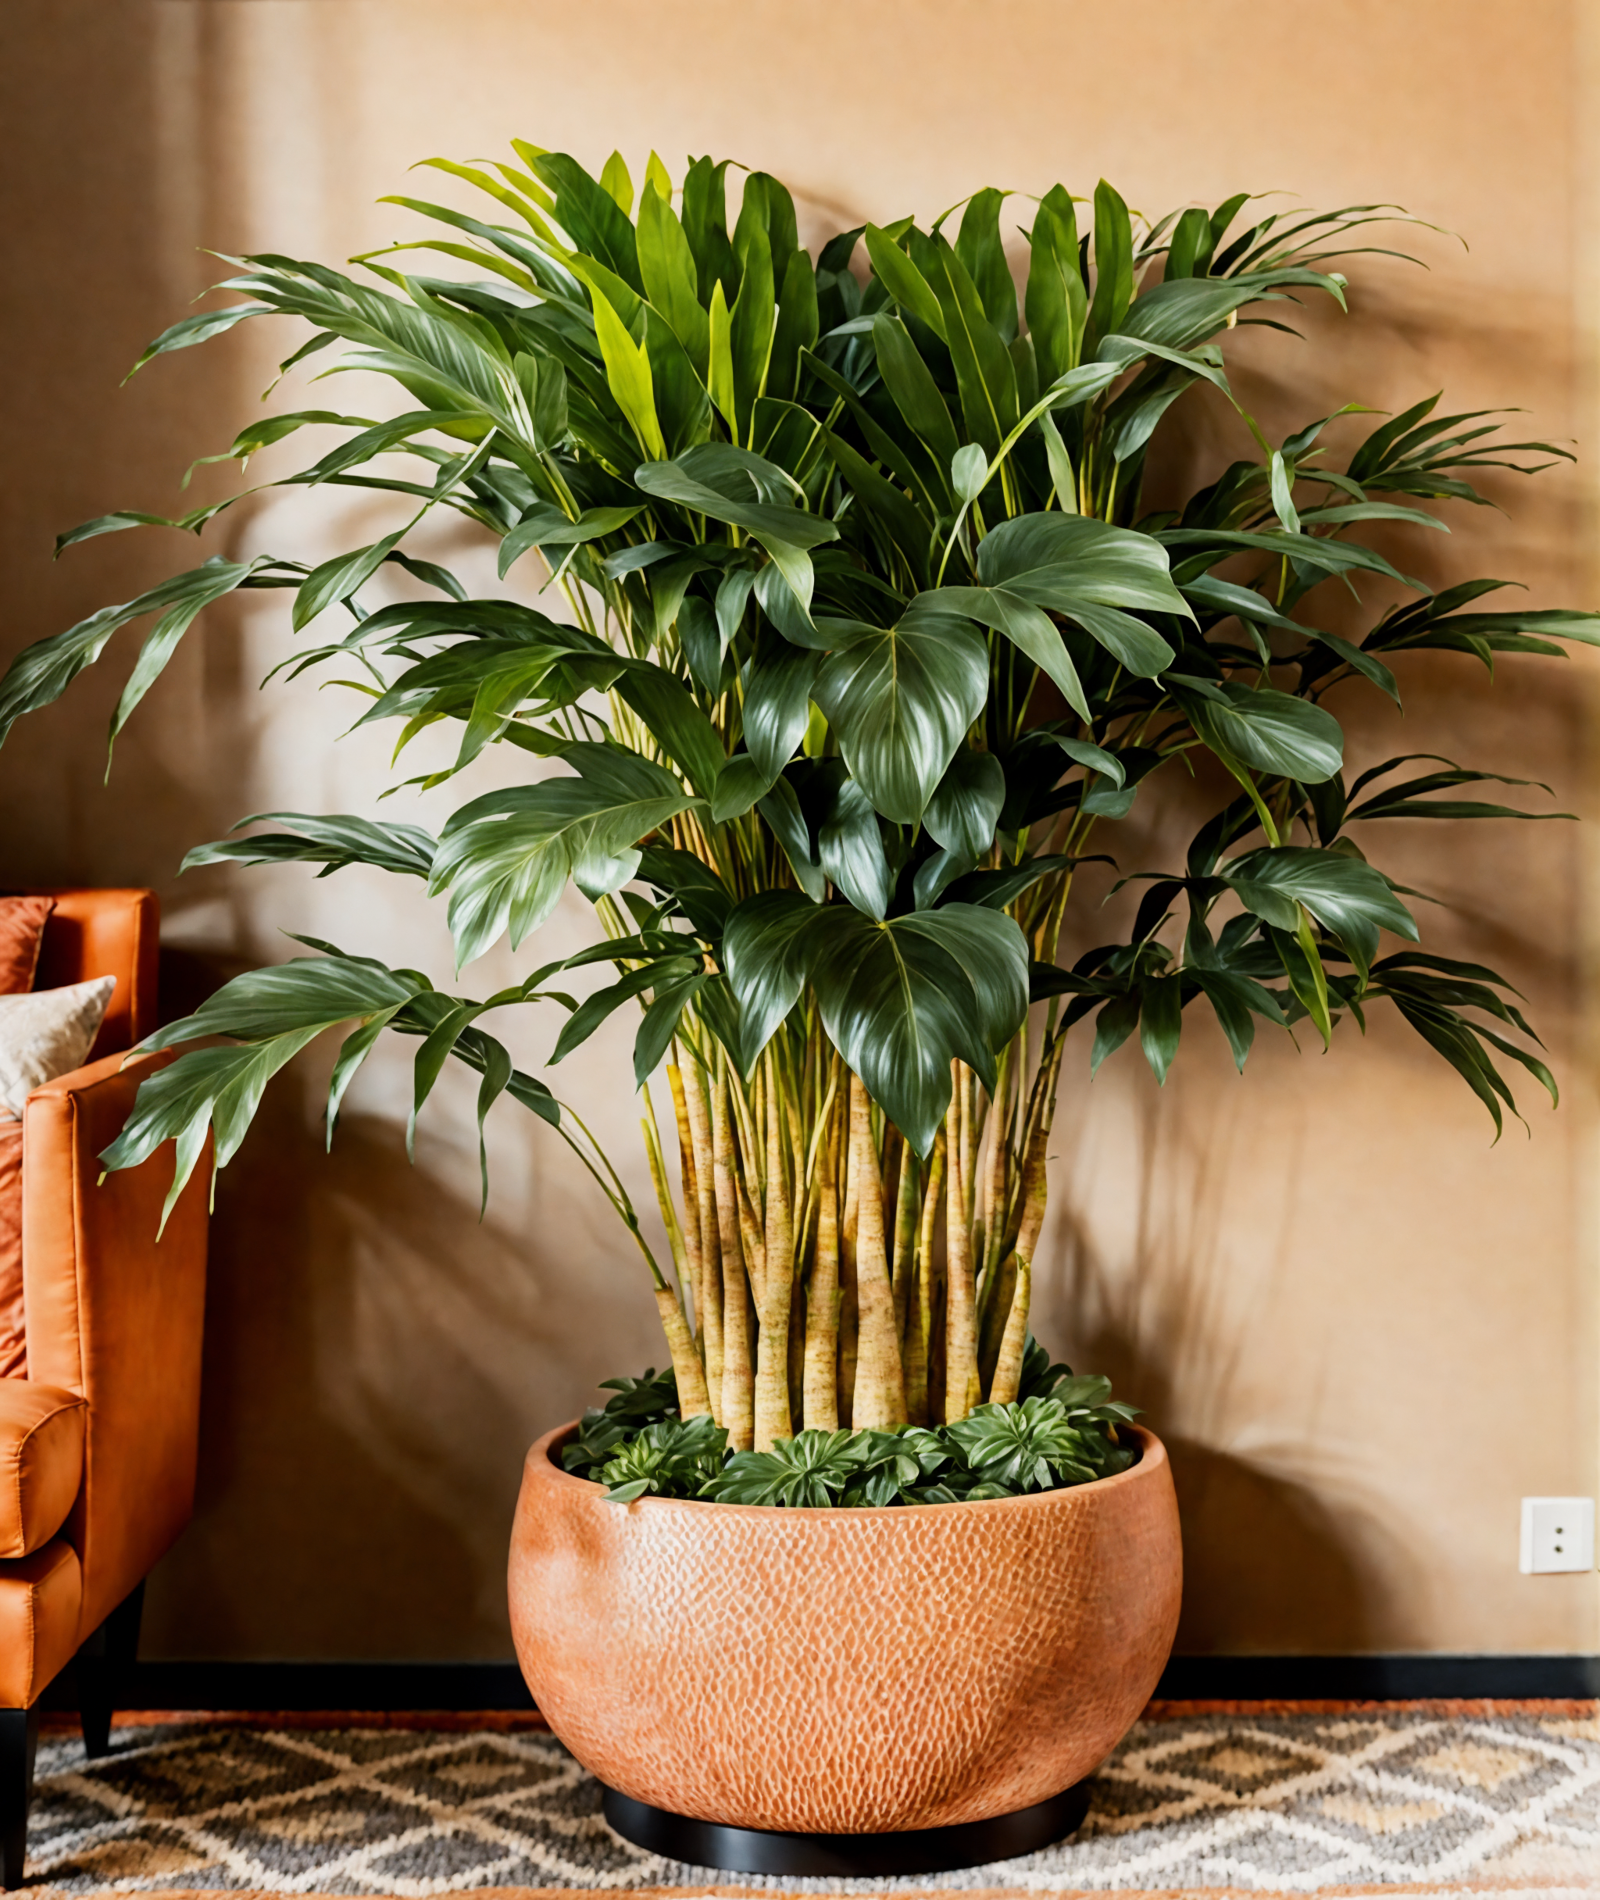 Two Dypsis lutescens (Areca palms) in a brown bowl planter on the floor in a rustic-style room.